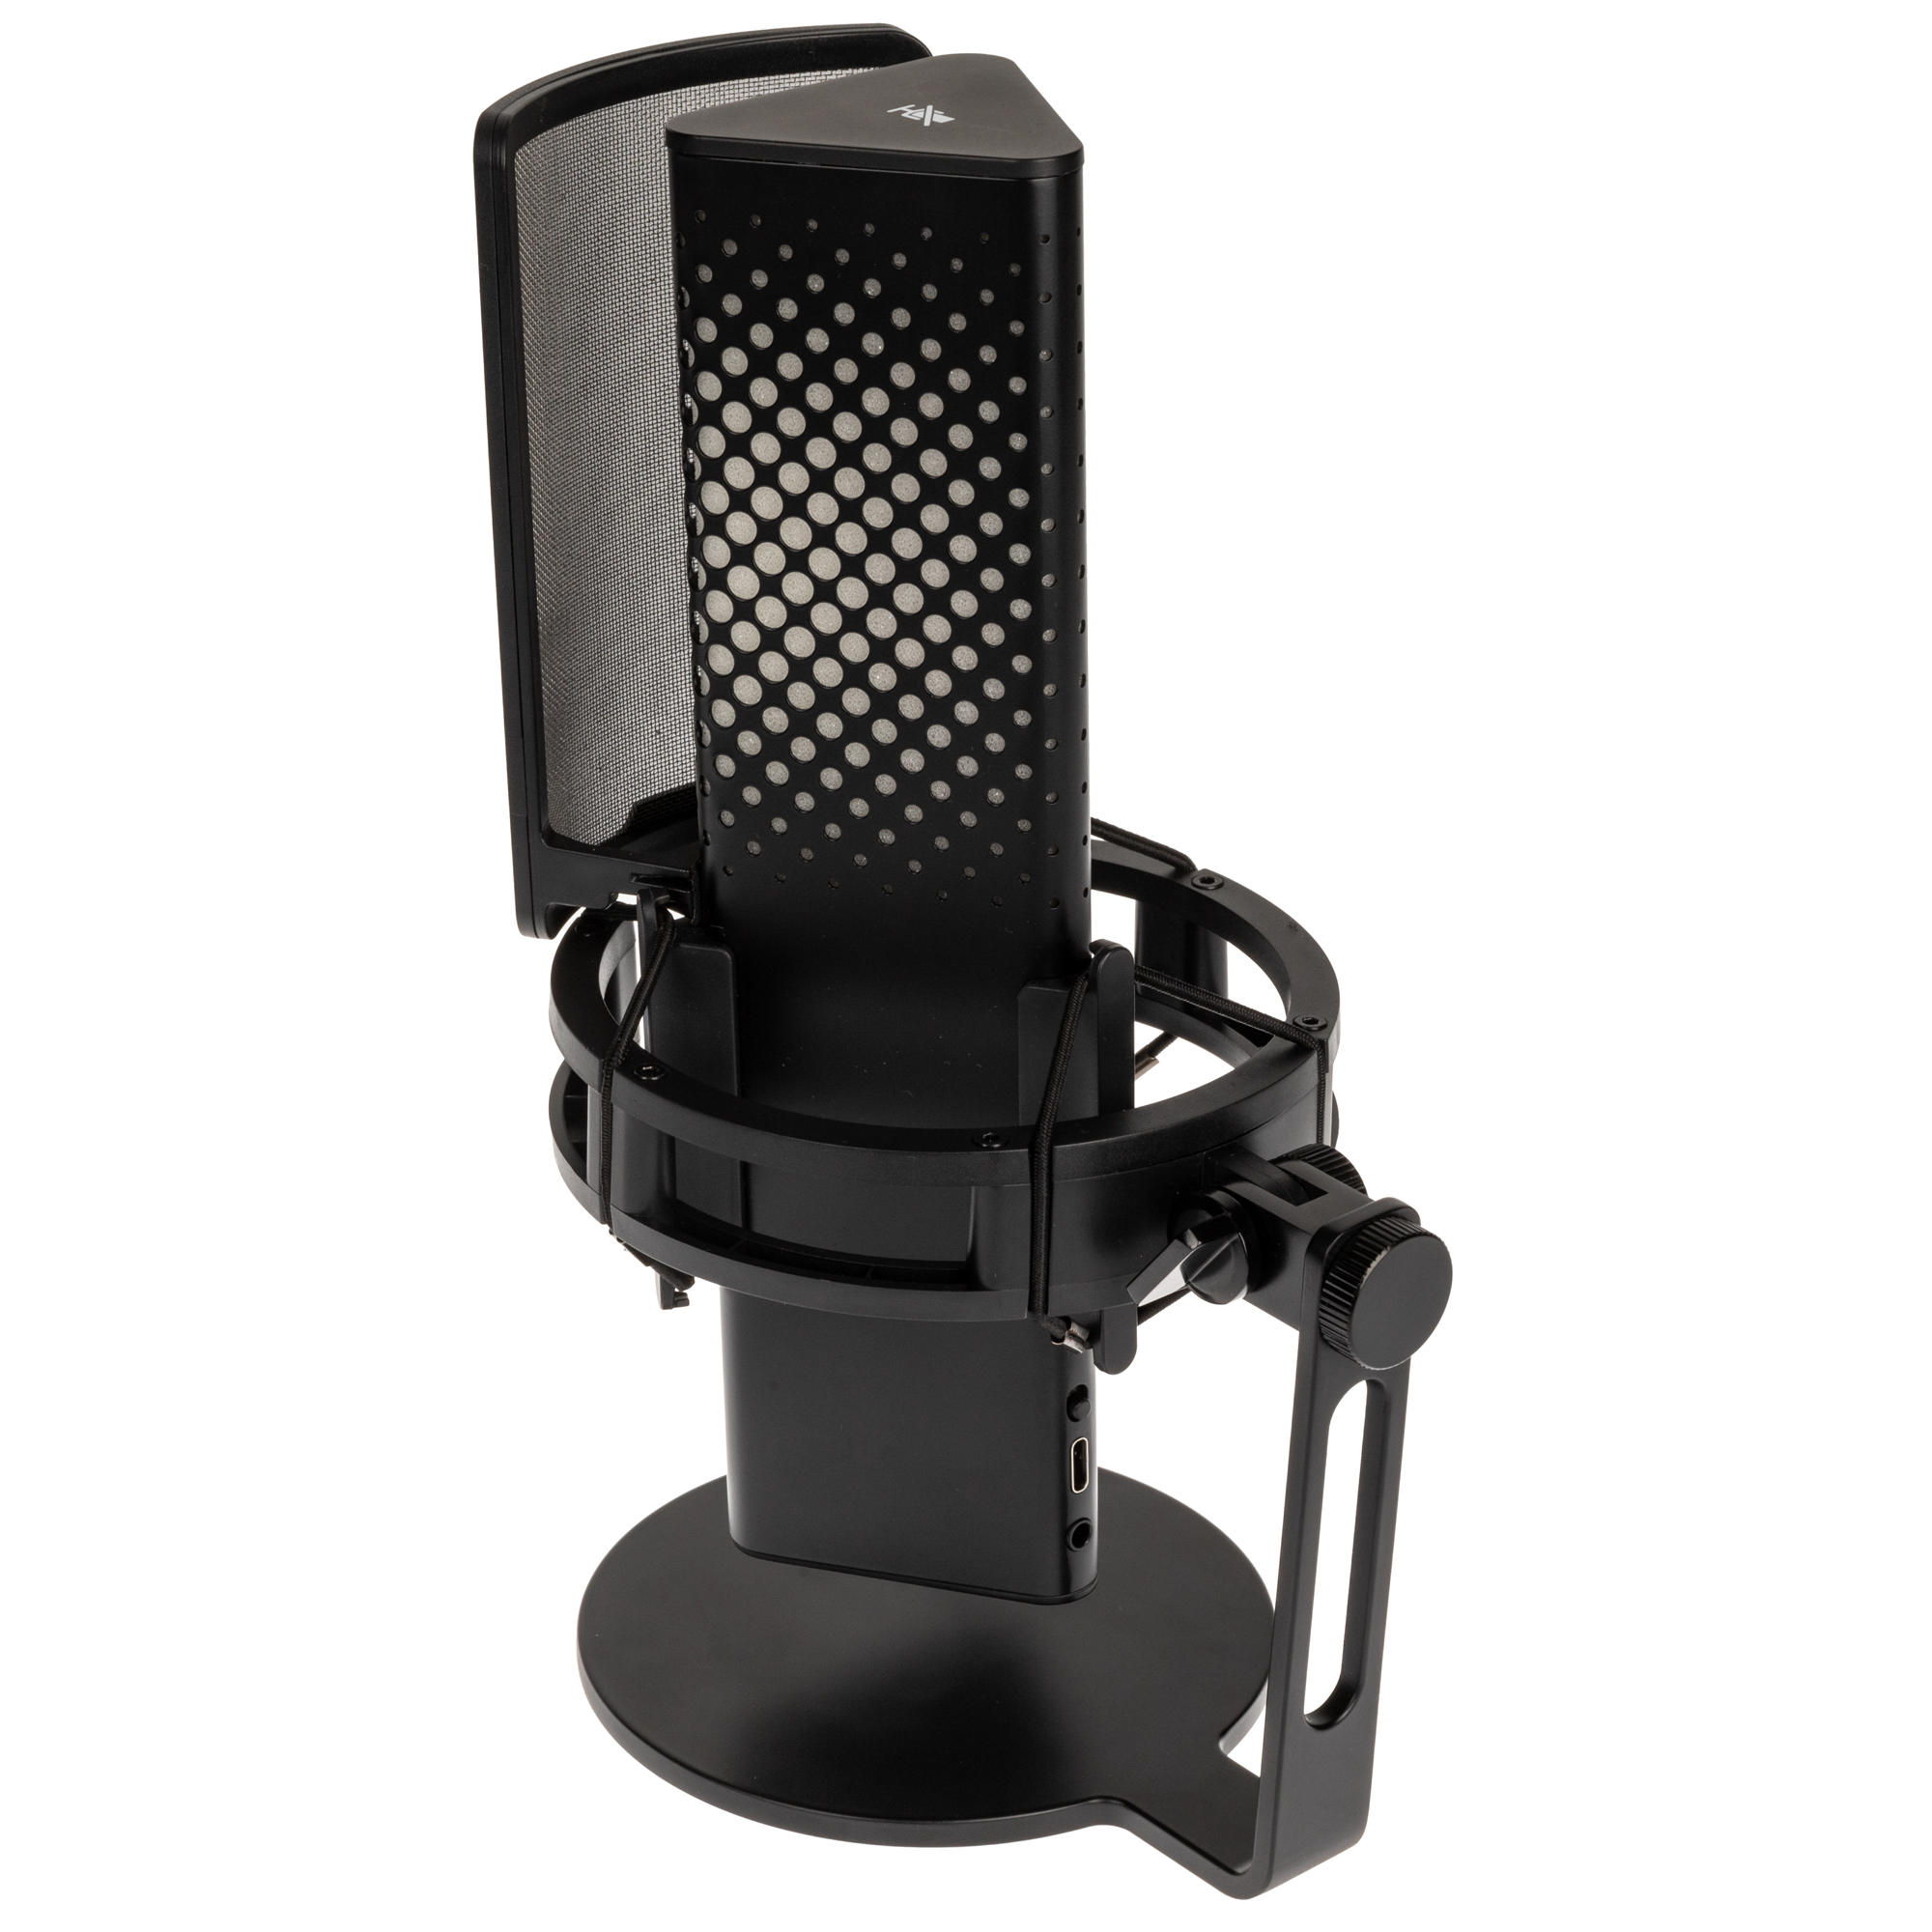 Endgame Gear - Endgame Gear XSTRM RGB USB Microphone with Shock Mount and Pop Filter - Black (EGG-XST-BLK)